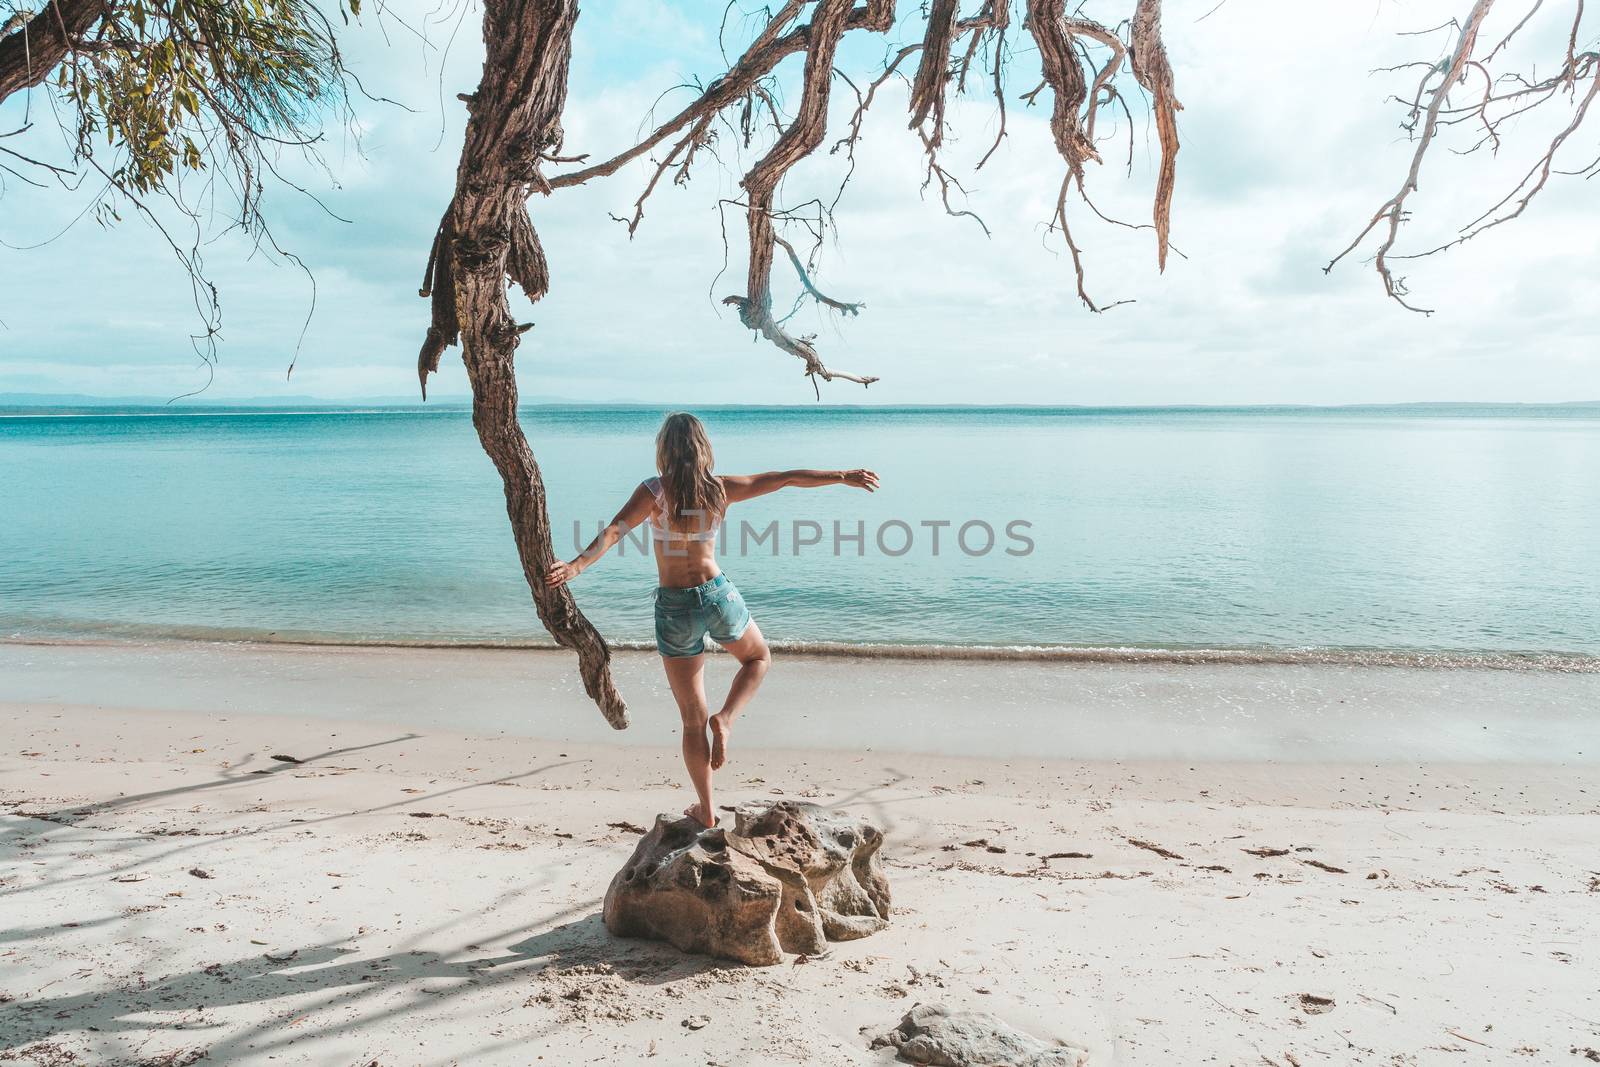 A female on an idyllic beach balancng on one leg in the warmth of the early light.  The morning is beautiful and the ocean is calm...., beach, holiday, weekend getaway, fun